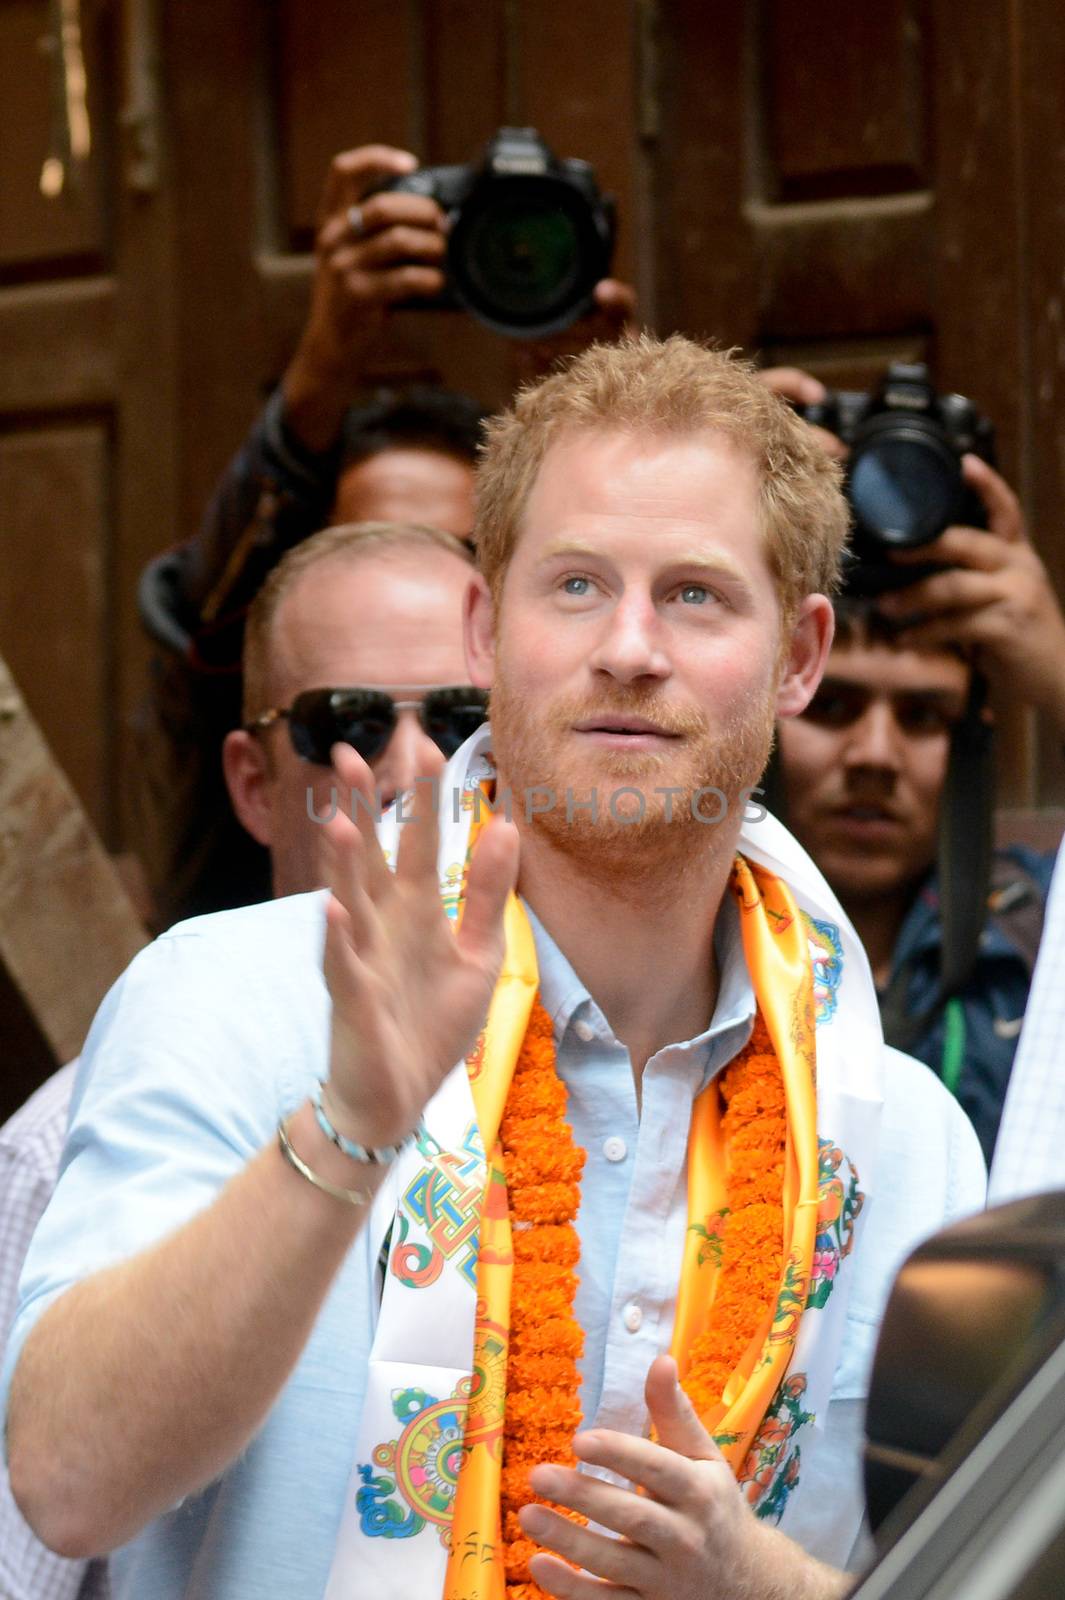 NEPAL, Kathmandu : Britain's Prince Harry (C) waves as he walks with officials as he visits heritage sites in Patan Durbar Square on the outskirts of Kathmandu on March 20, 2016. Britain's Prince Harry arrived in Nepal for a five-day visit and said he hopes to shine a spotlight on resilience of Nepali people recovering from last year's devastating quake. 